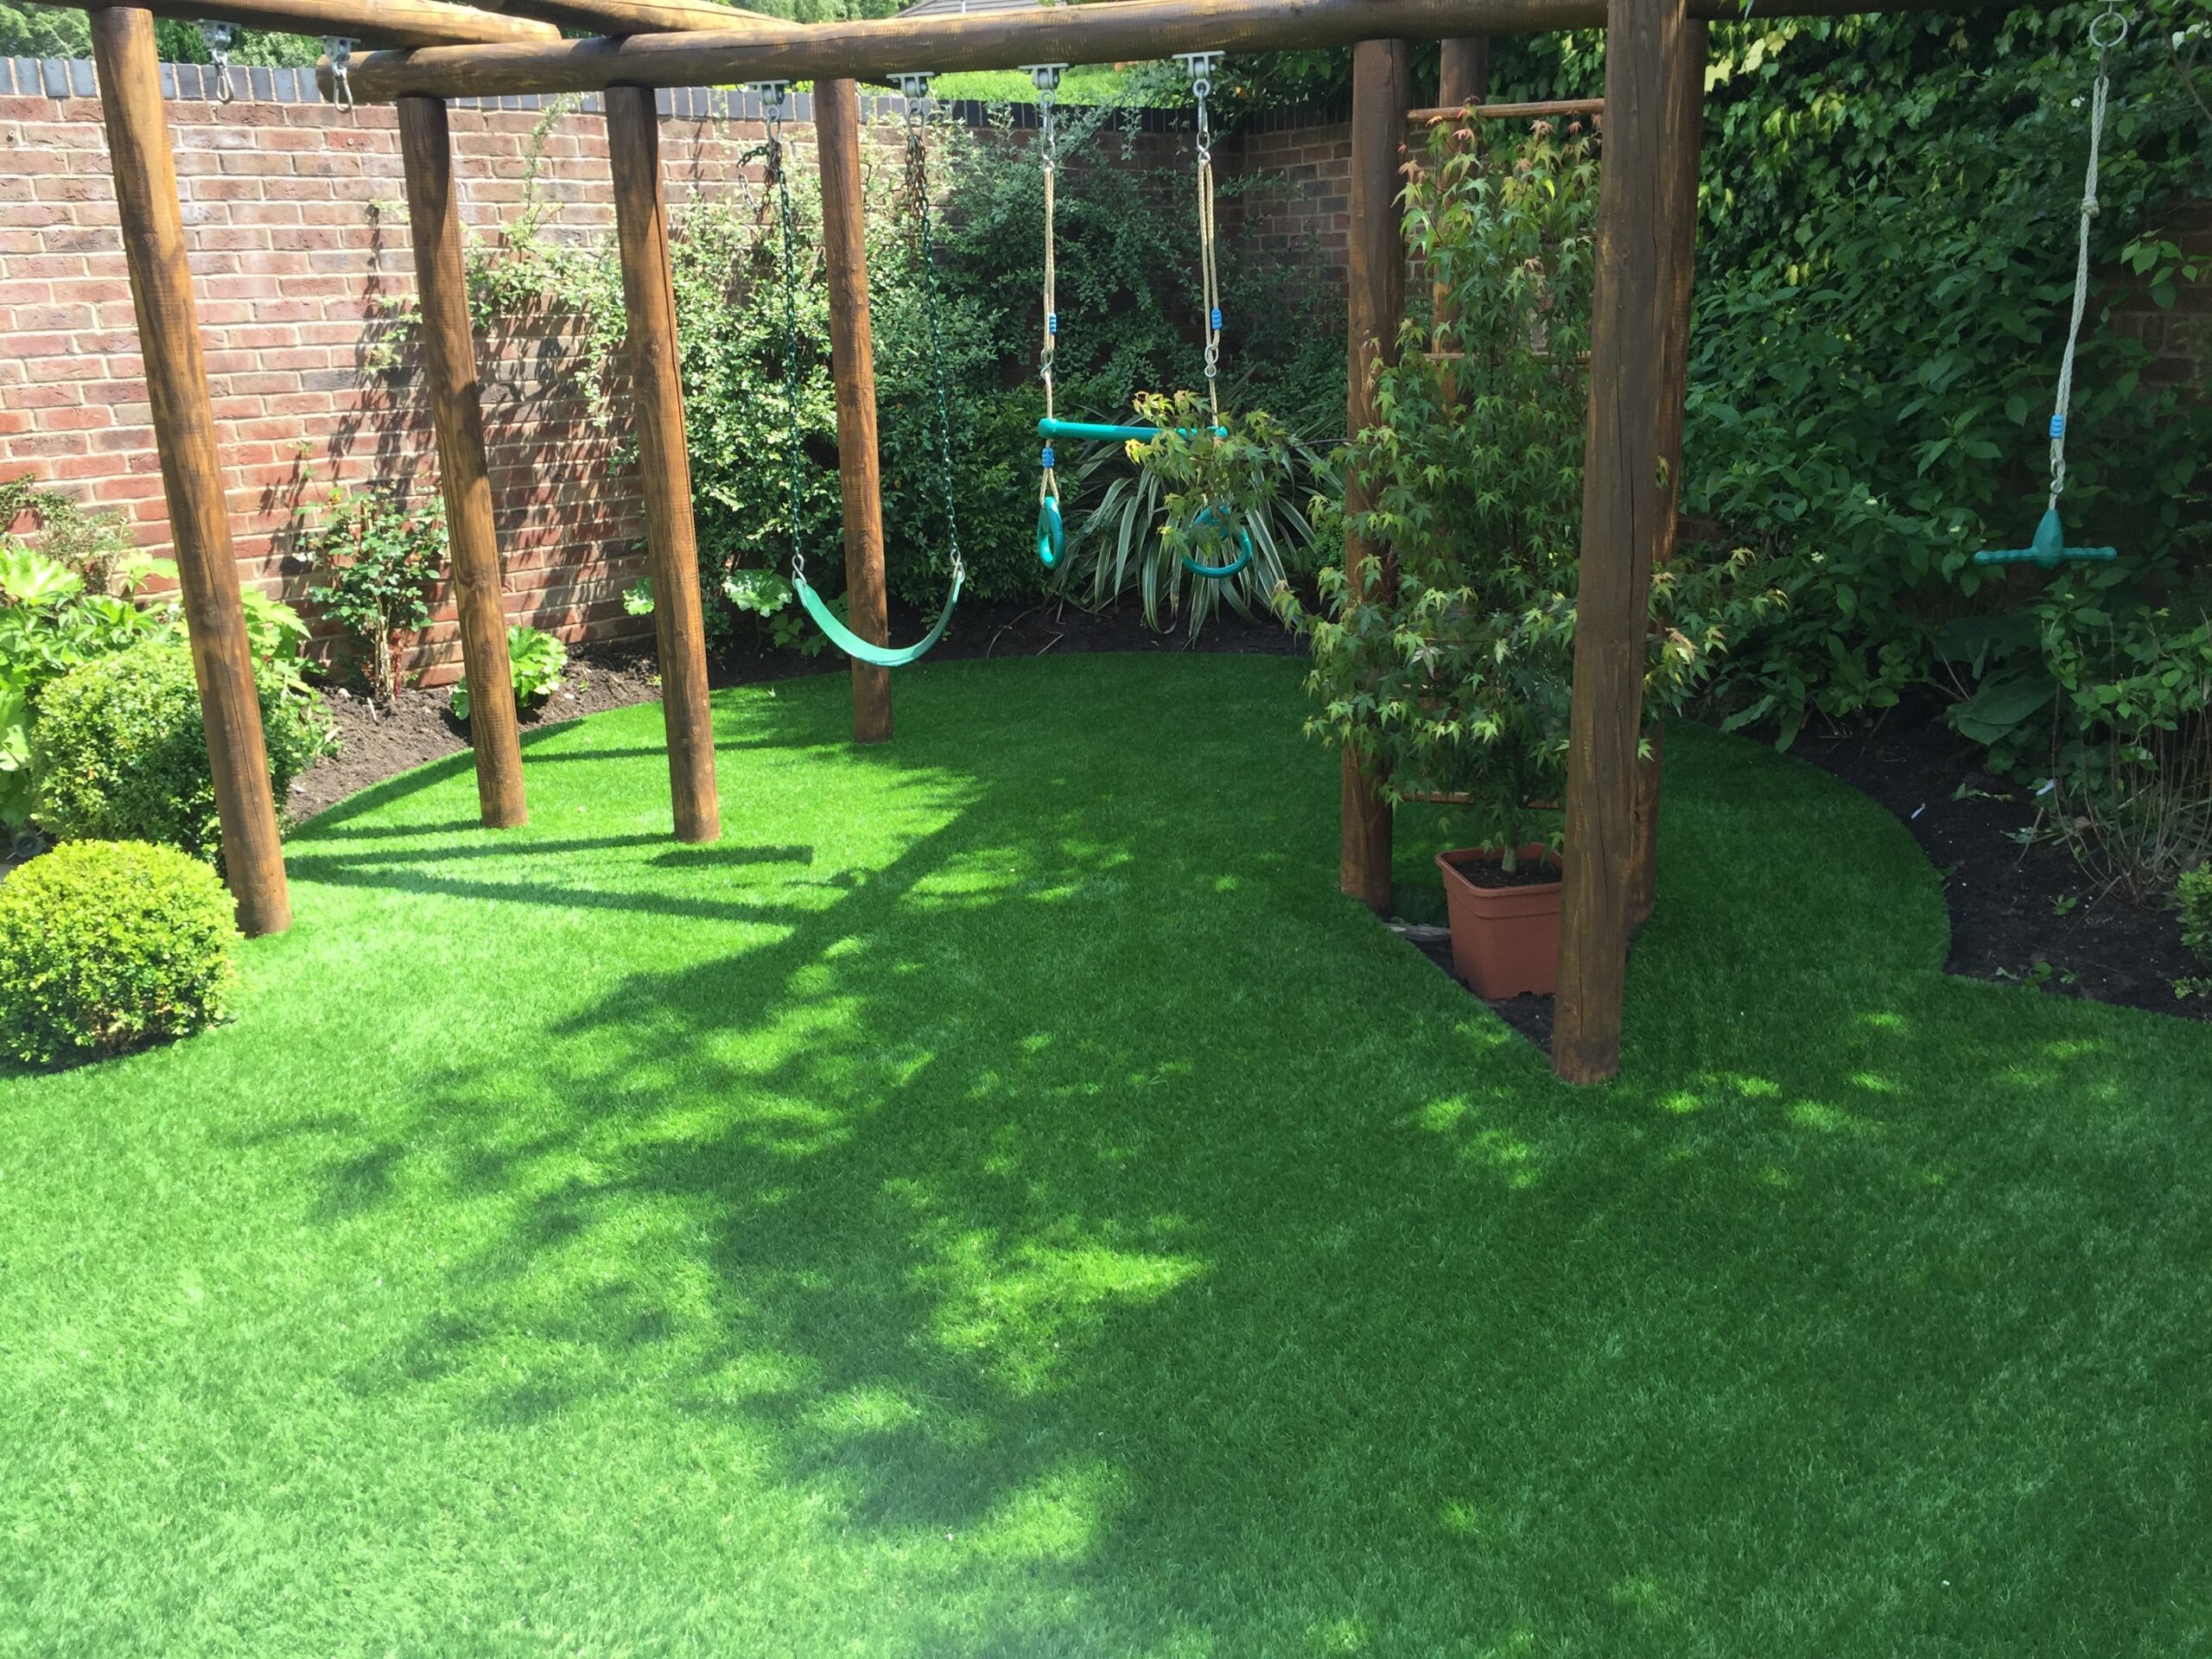 Photo of climbing frame and artificial grass for kids.